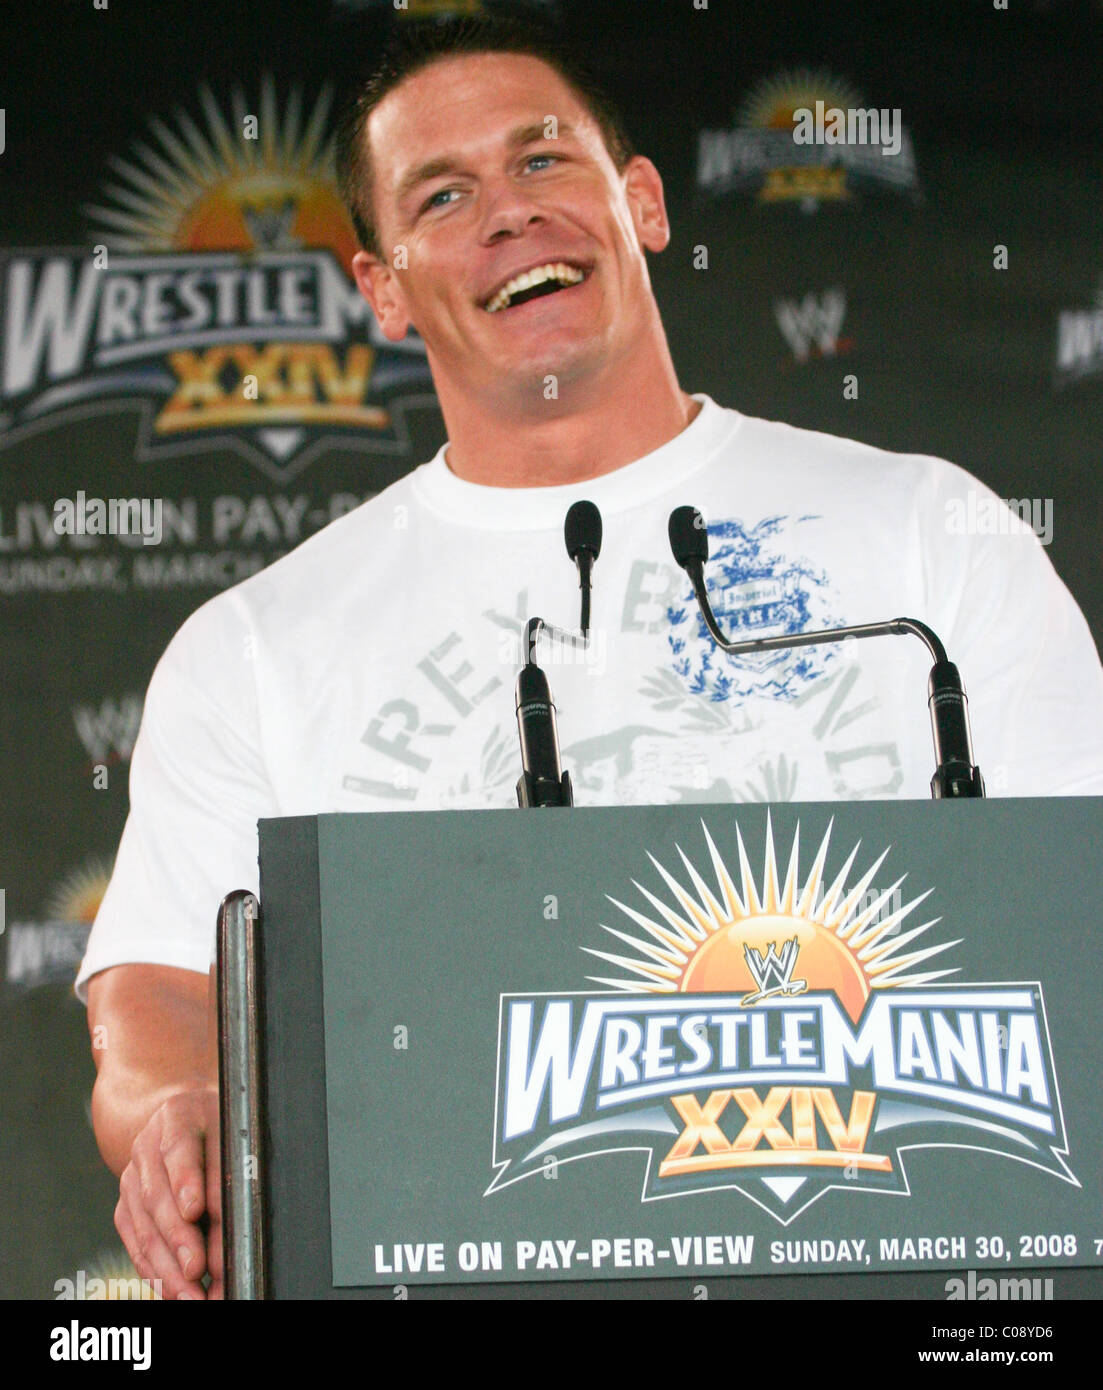 WWE wrester, John Cena At a press conference at the Staples Centre for WrestleMania XXIV taking place on Sunday, March 30th Stock Photo